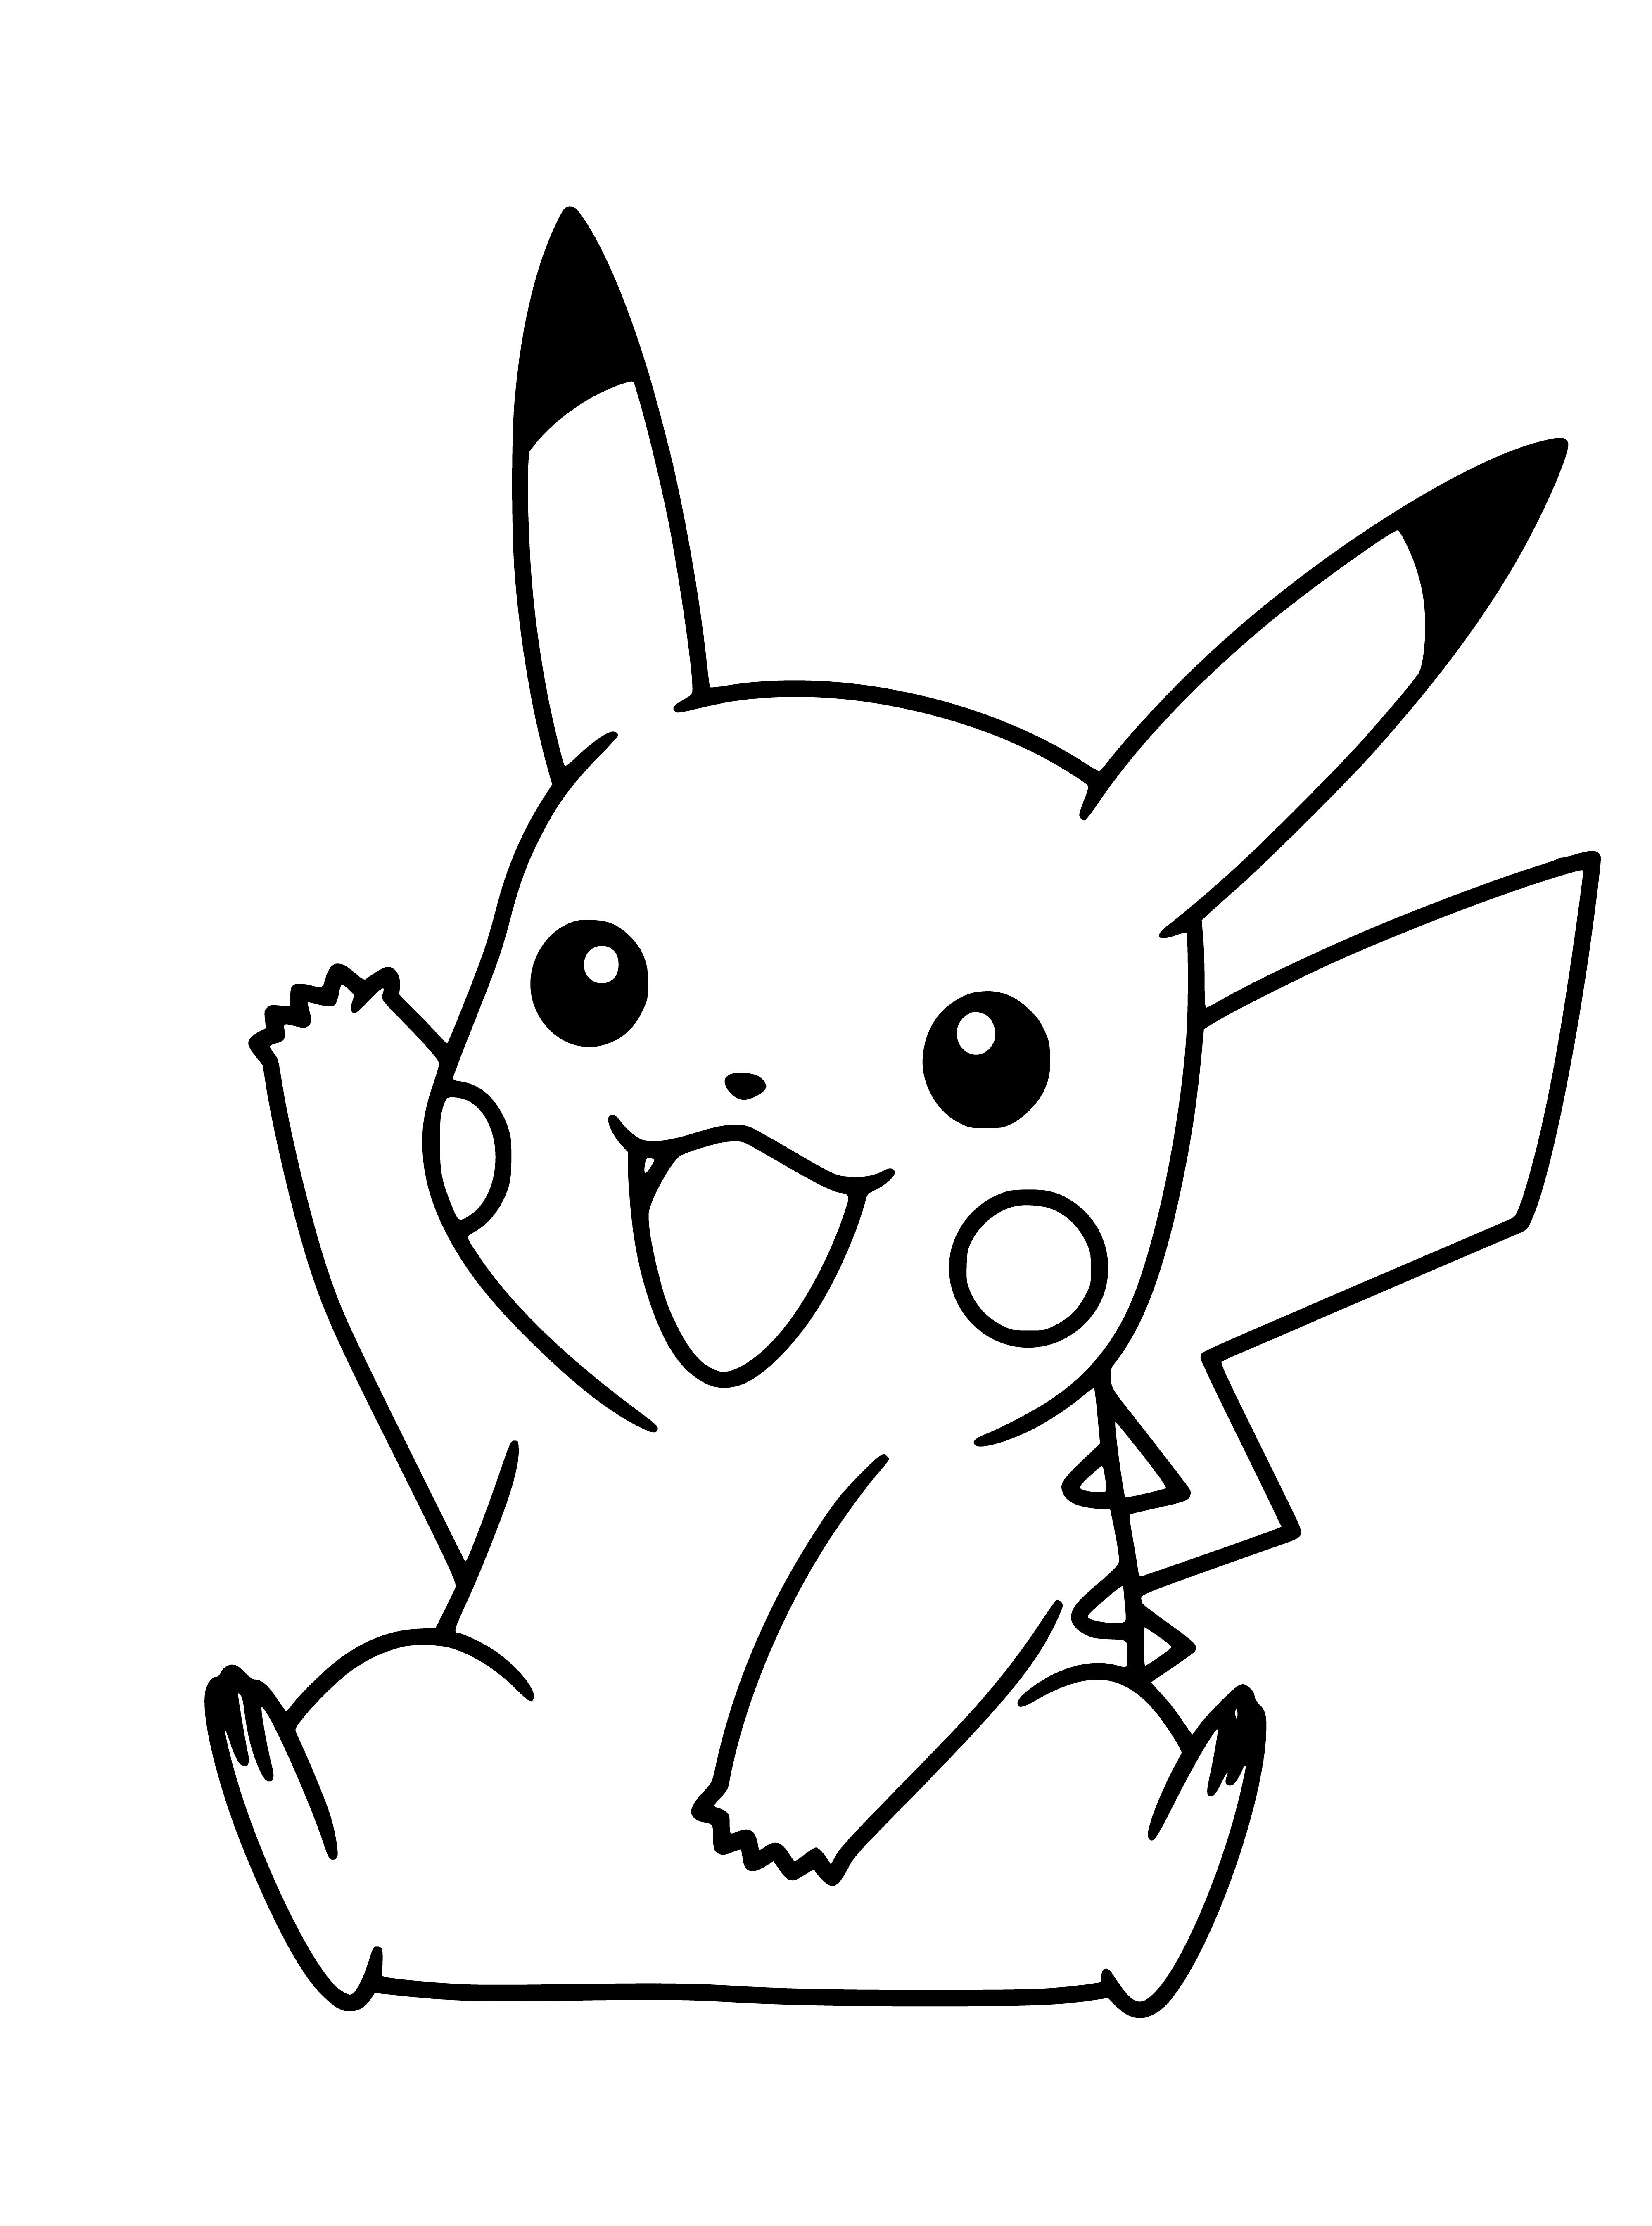 coloring page: Pikachu with pointed ears & striped tail stands on hind legs. Cheeks are red, and yellow w/ black stripes run down back.